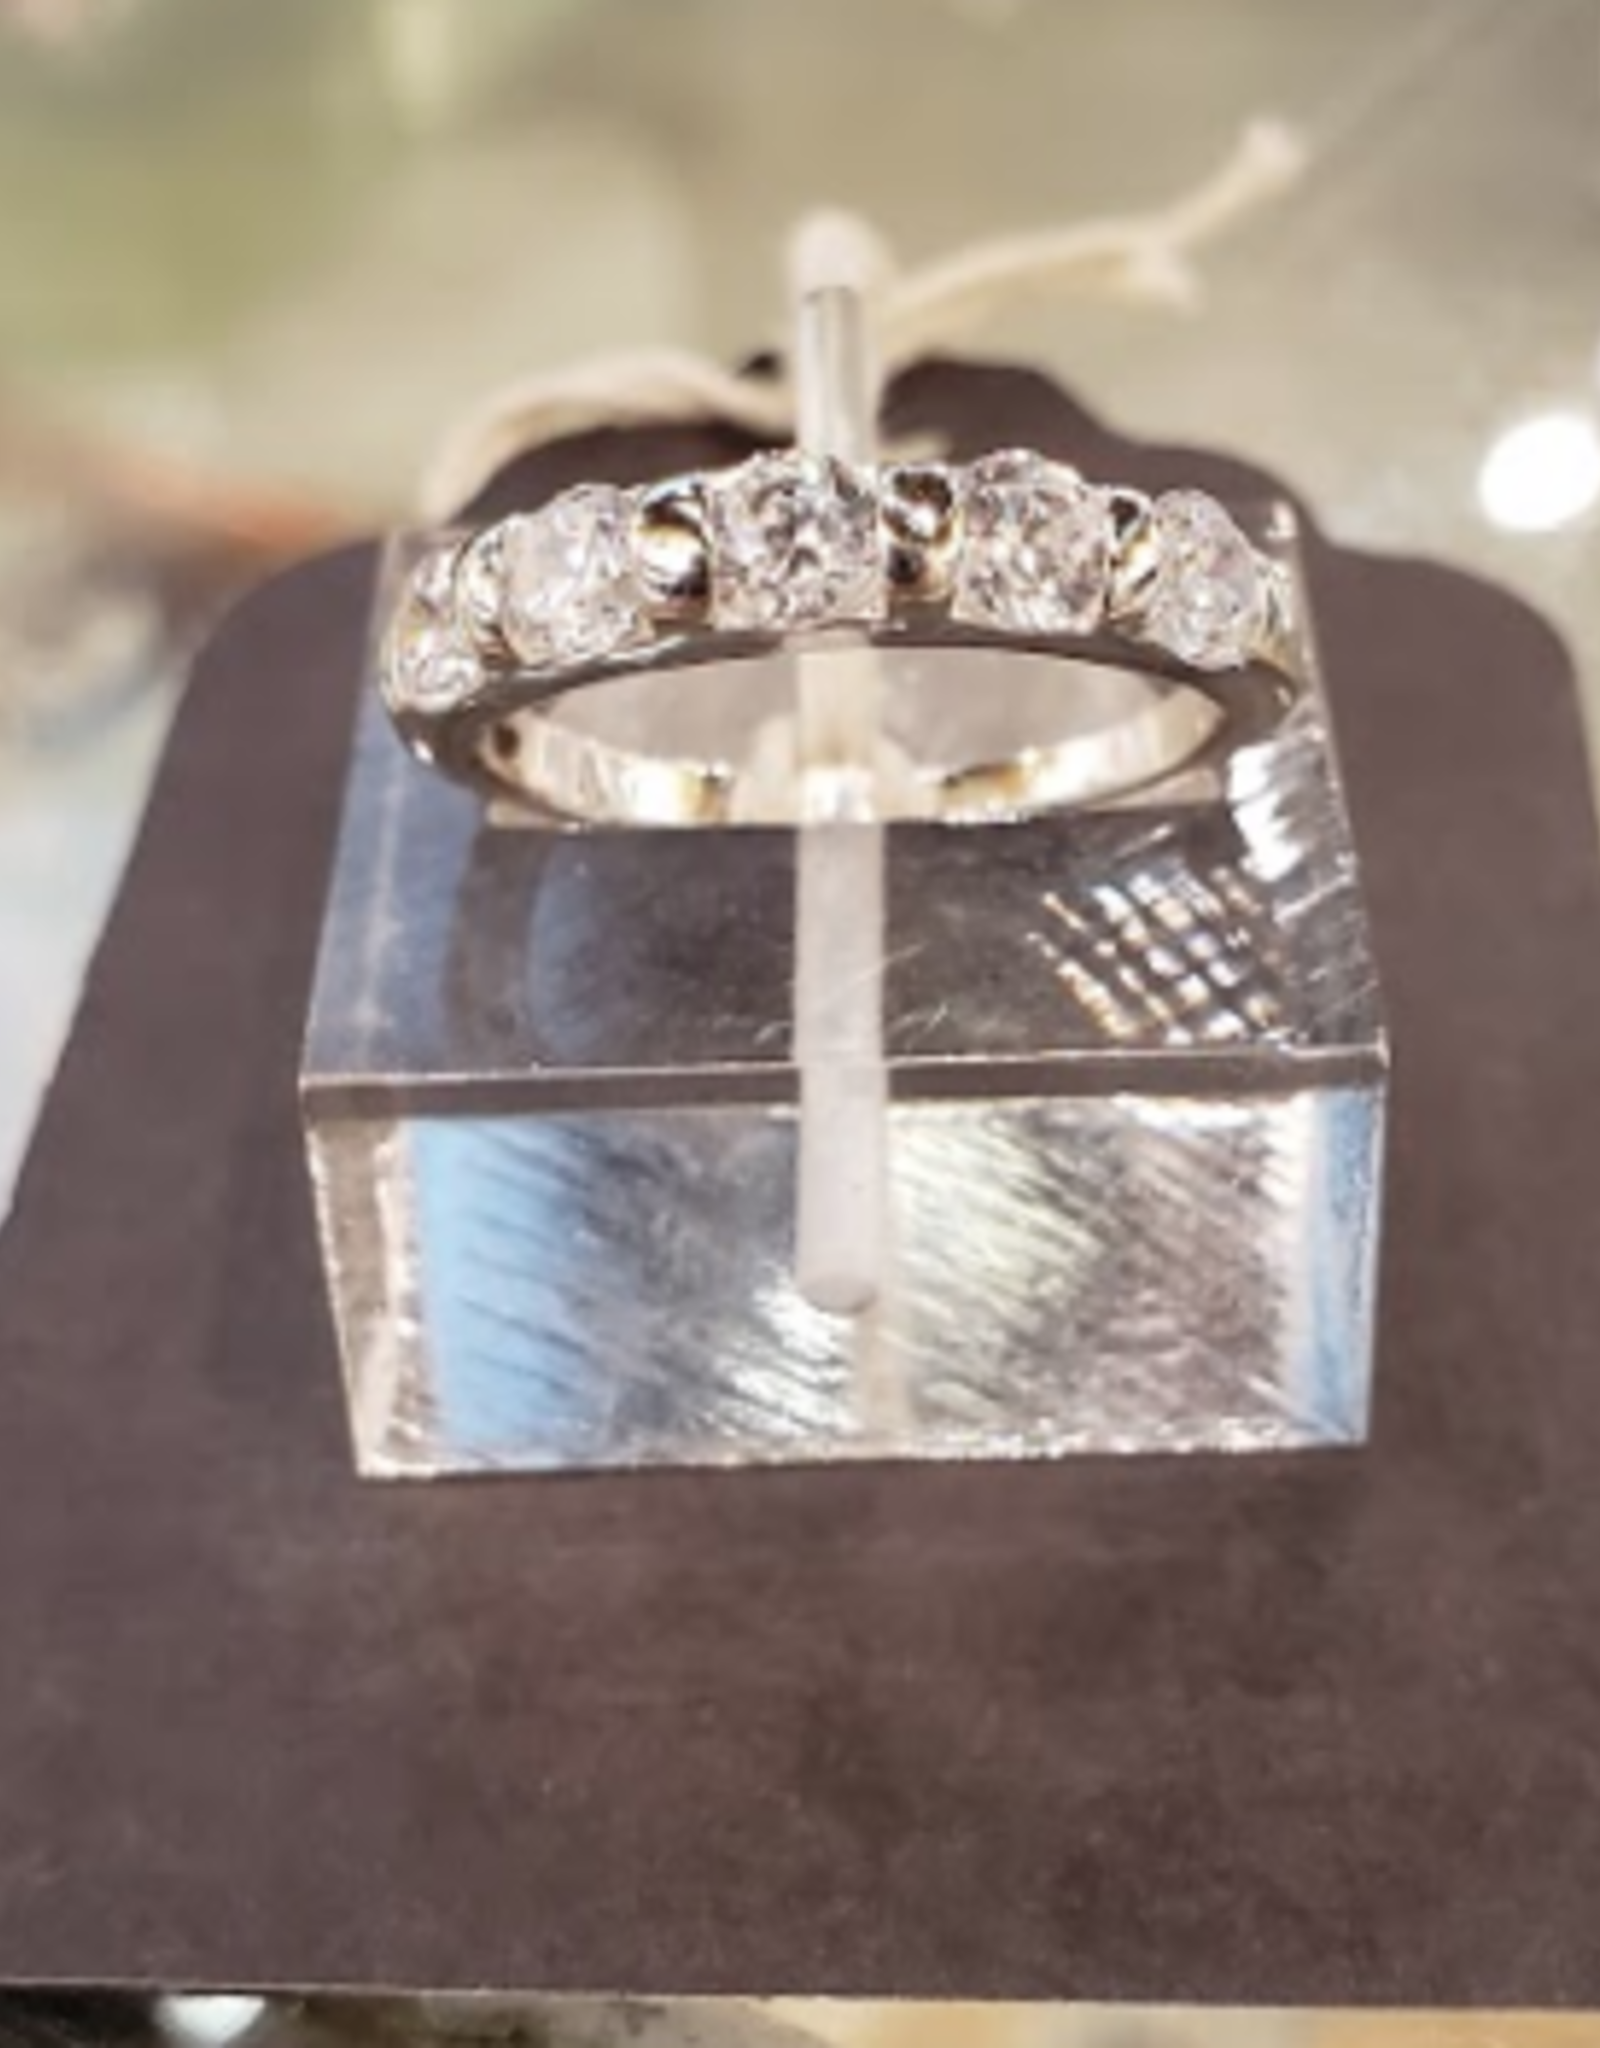 Chris Gillrie 5 Shimmering Cubic Zirconia Ring. Set in Soild Silver with Rhodium Plating. Size 7